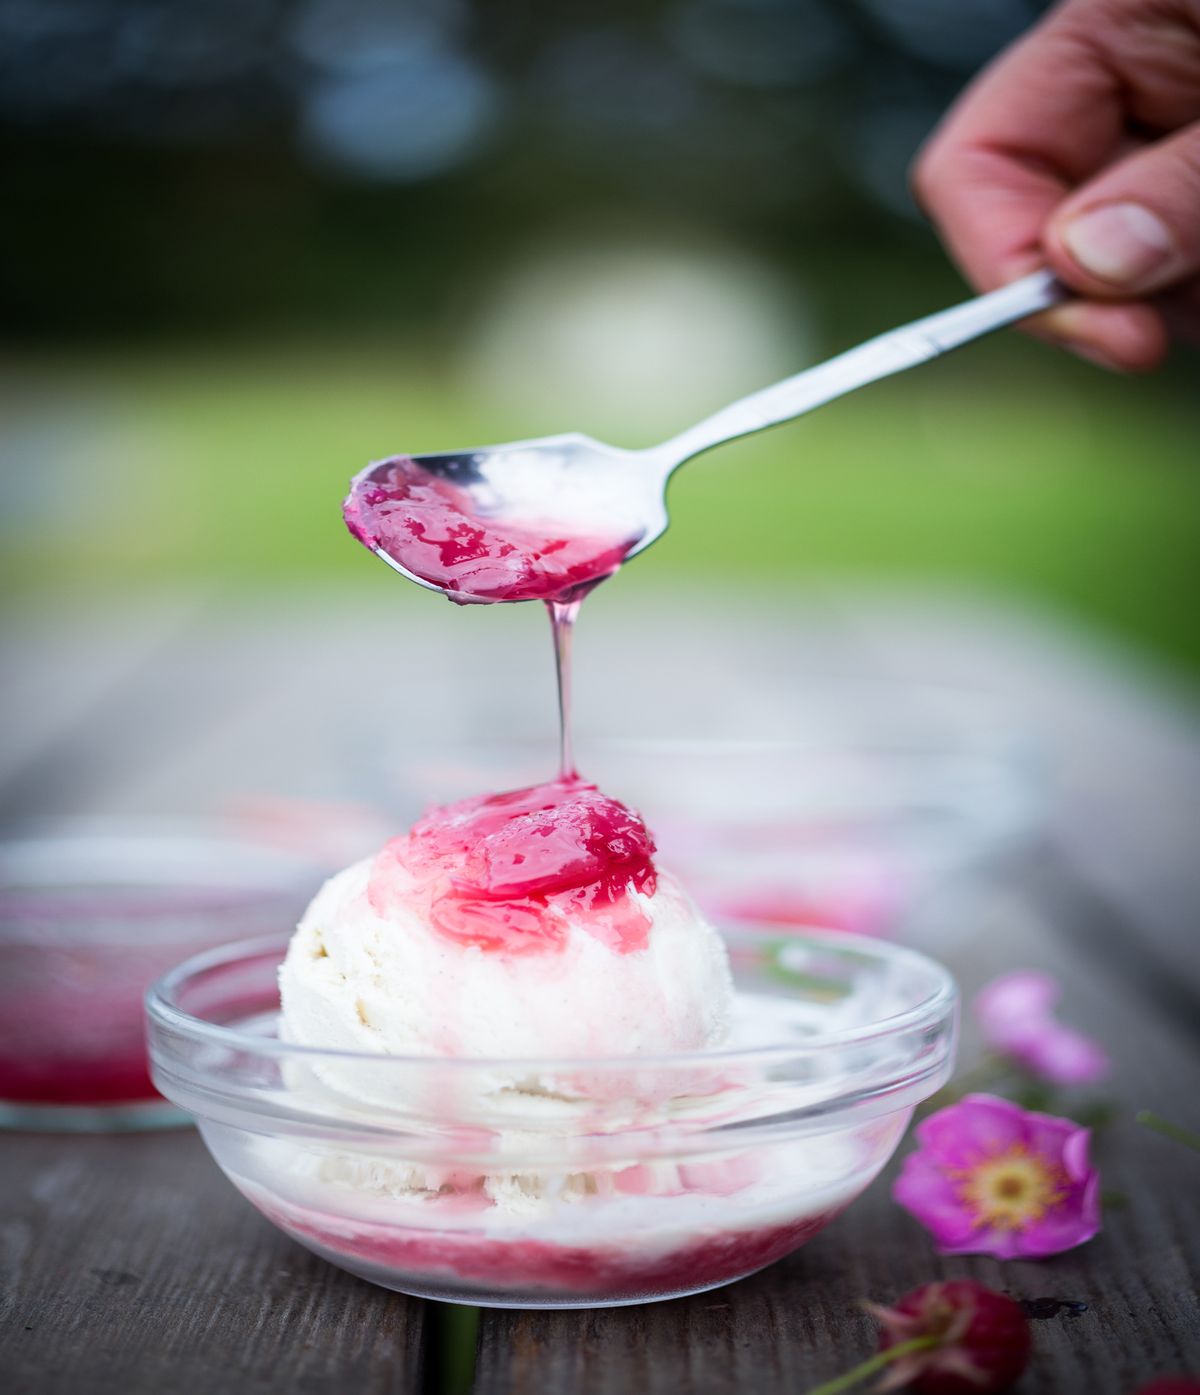 Wild Rose Petal Jam has a syrupy consistency, perfect for serving over vanilla ice cream. (Photo by Sylvia Fountaine)